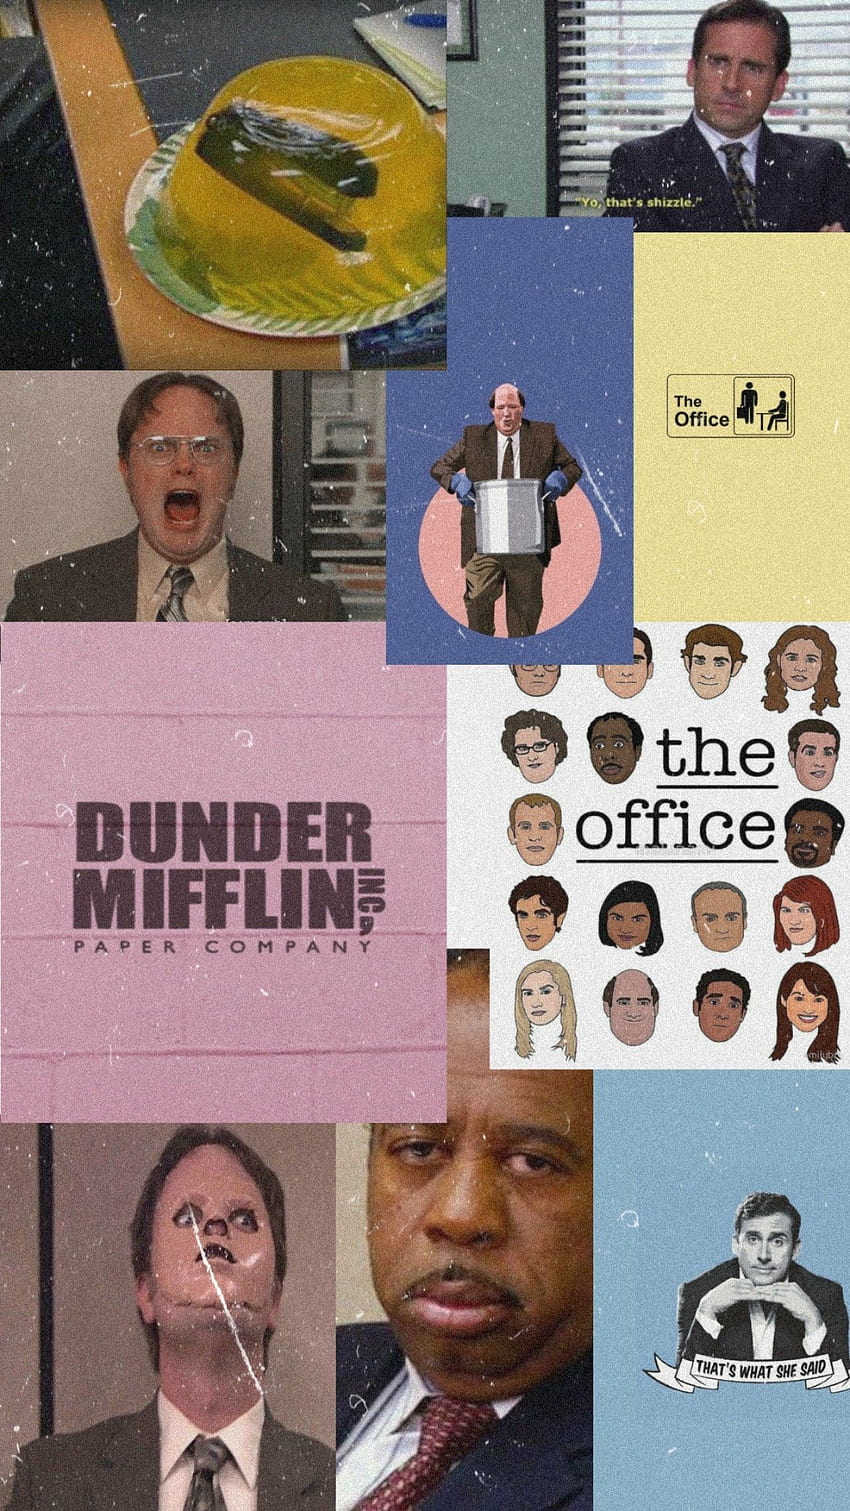 The Office wallpaper I made! Let me know if you want me to make more - The Office